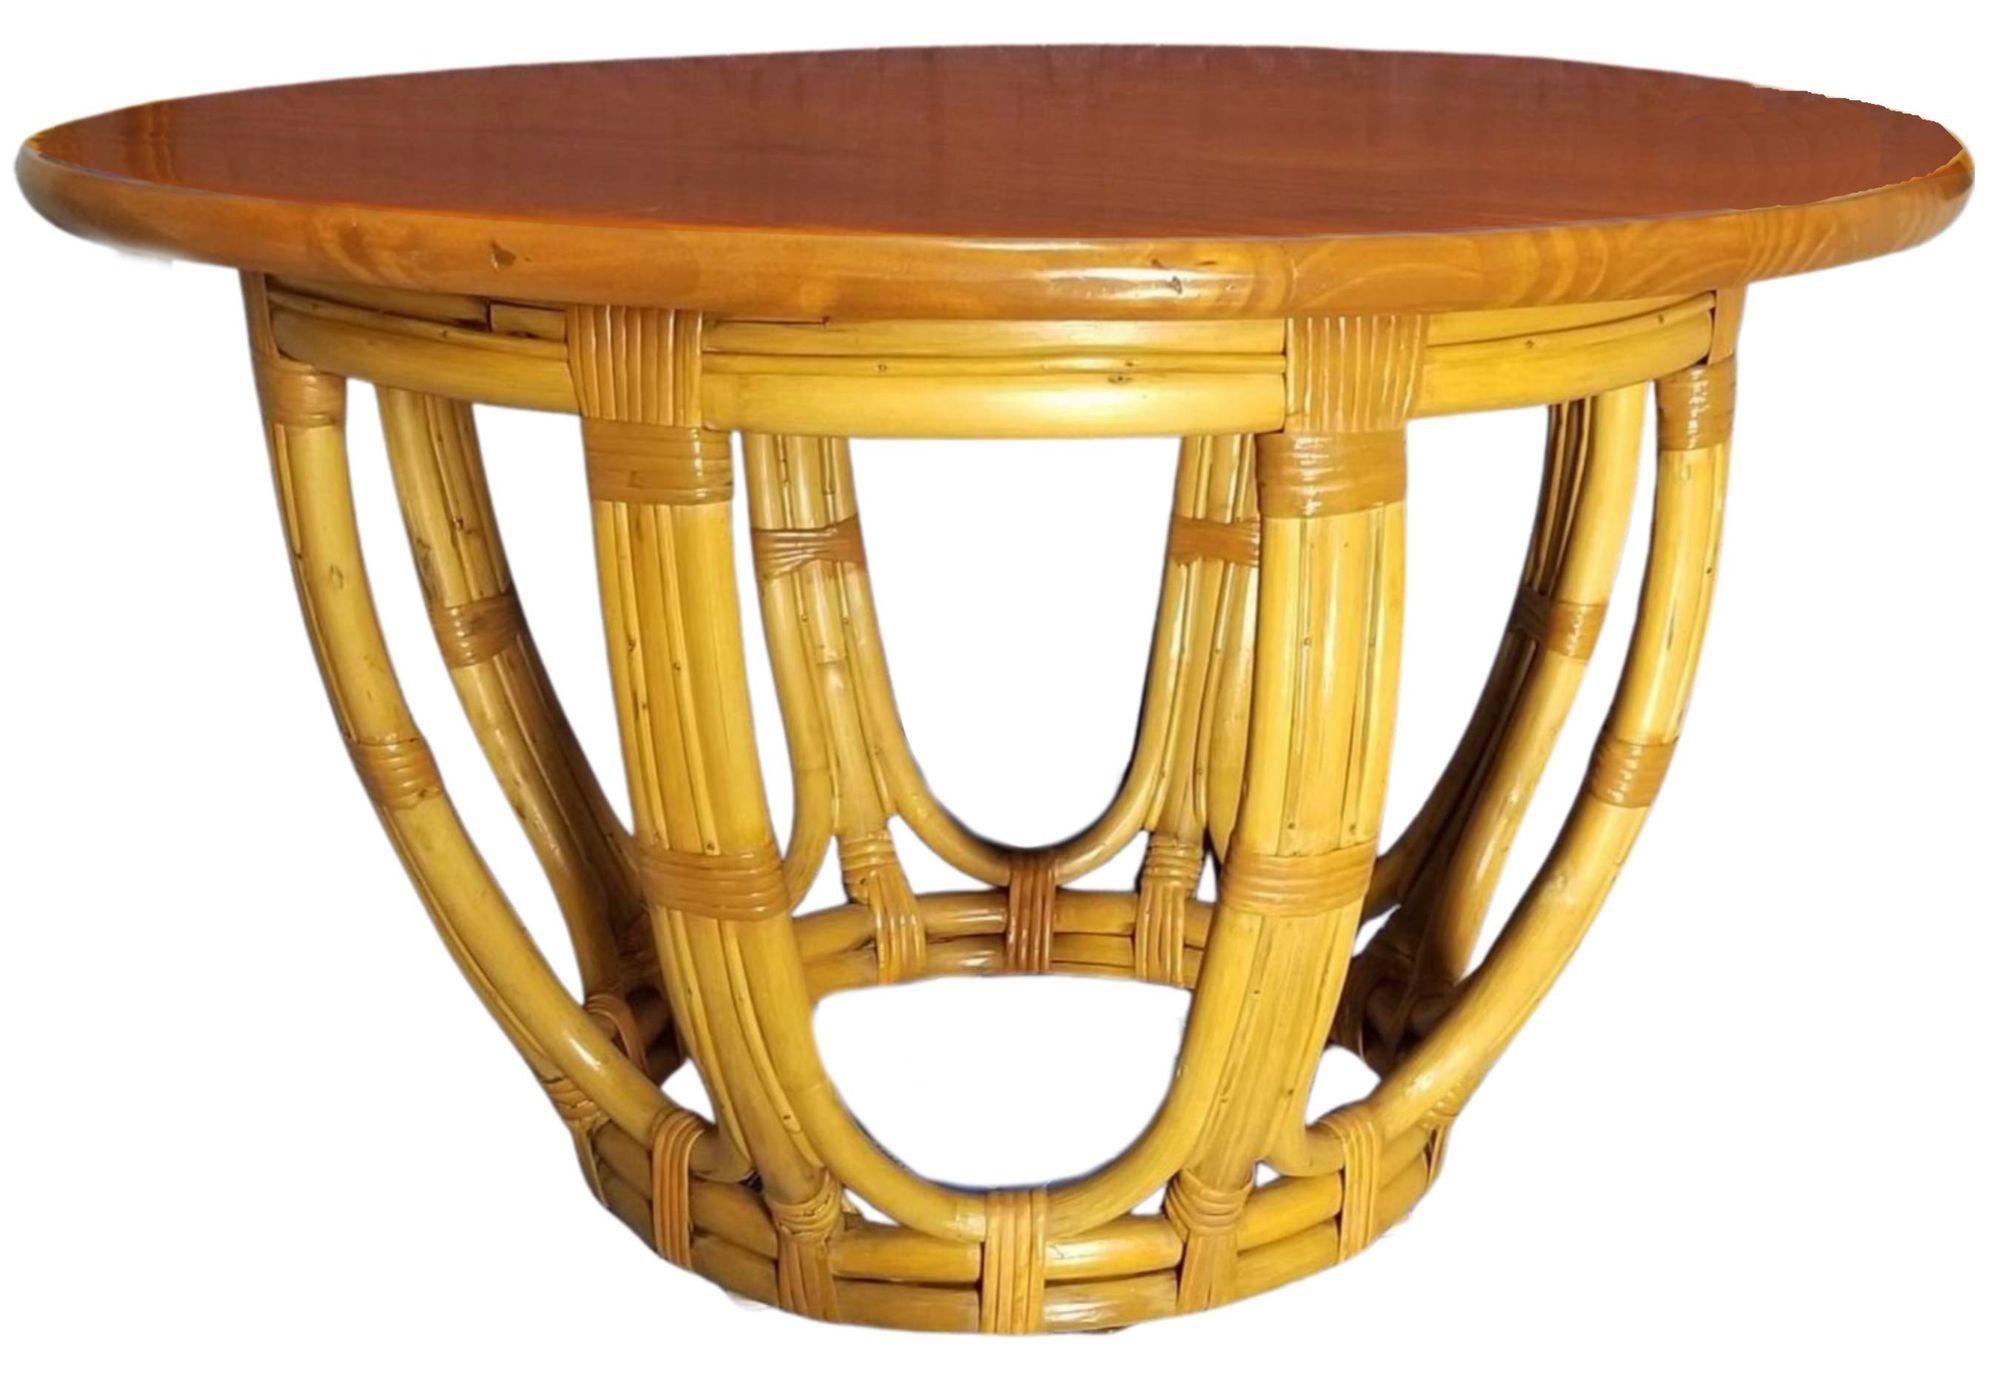 A Restored round mahogany coffee table with a drum style rattan base and wicker leg wrappings.
circa 1950, USA
All rattan, bamboo and wicker furniture has been painstakingly refurbished to the highest standards with the best materials. All